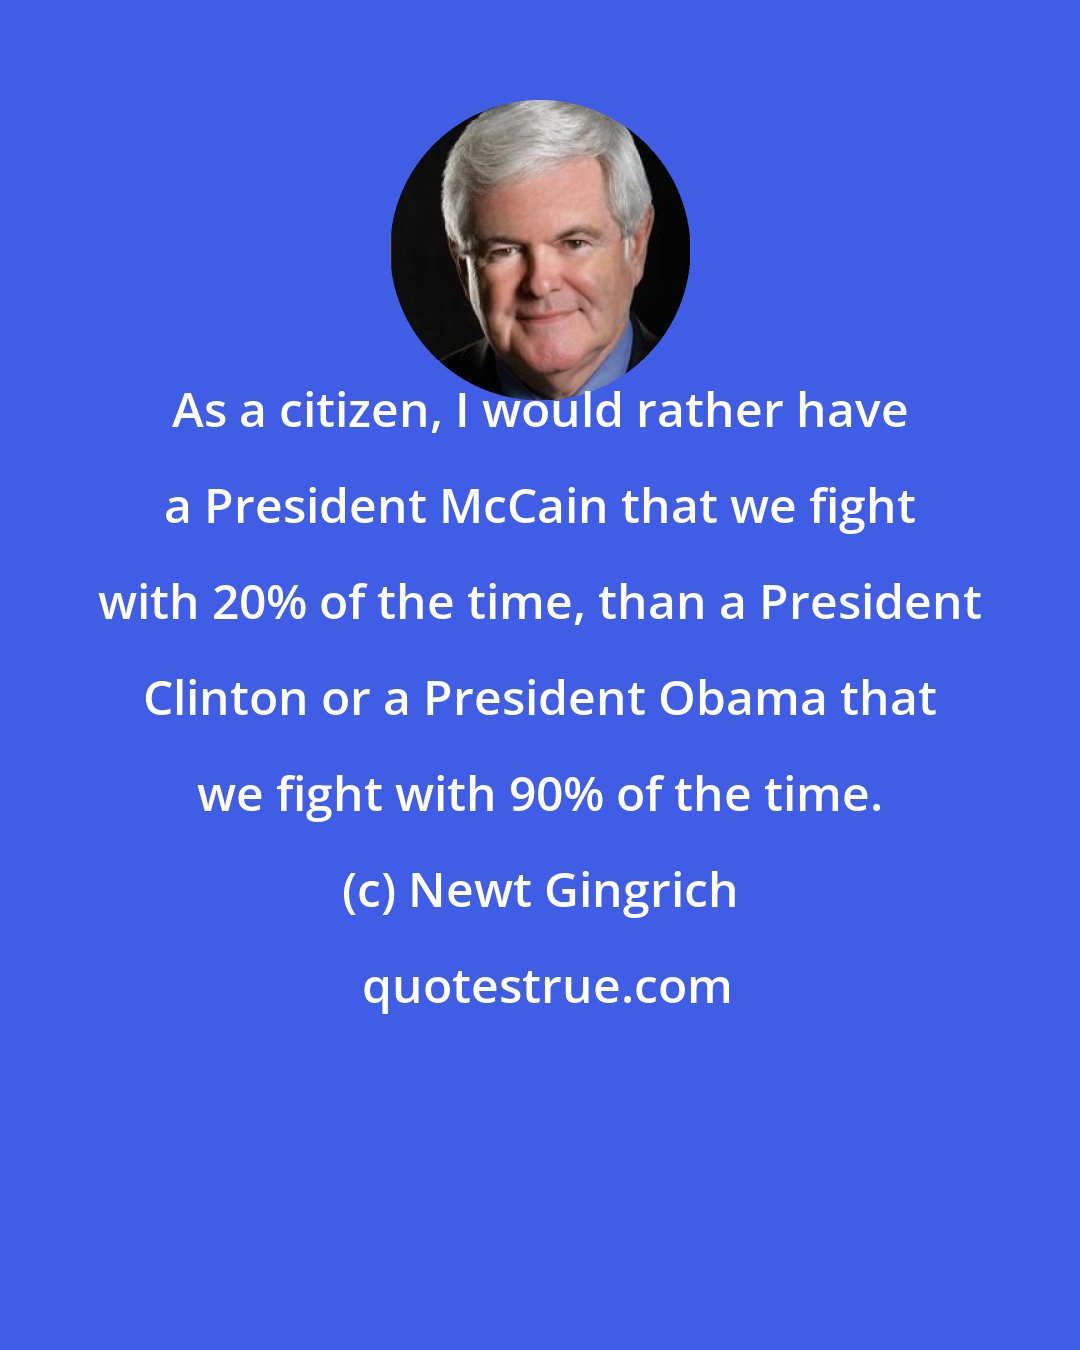 Newt Gingrich: As a citizen, I would rather have a President McCain that we fight with 20% of the time, than a President Clinton or a President Obama that we fight with 90% of the time.